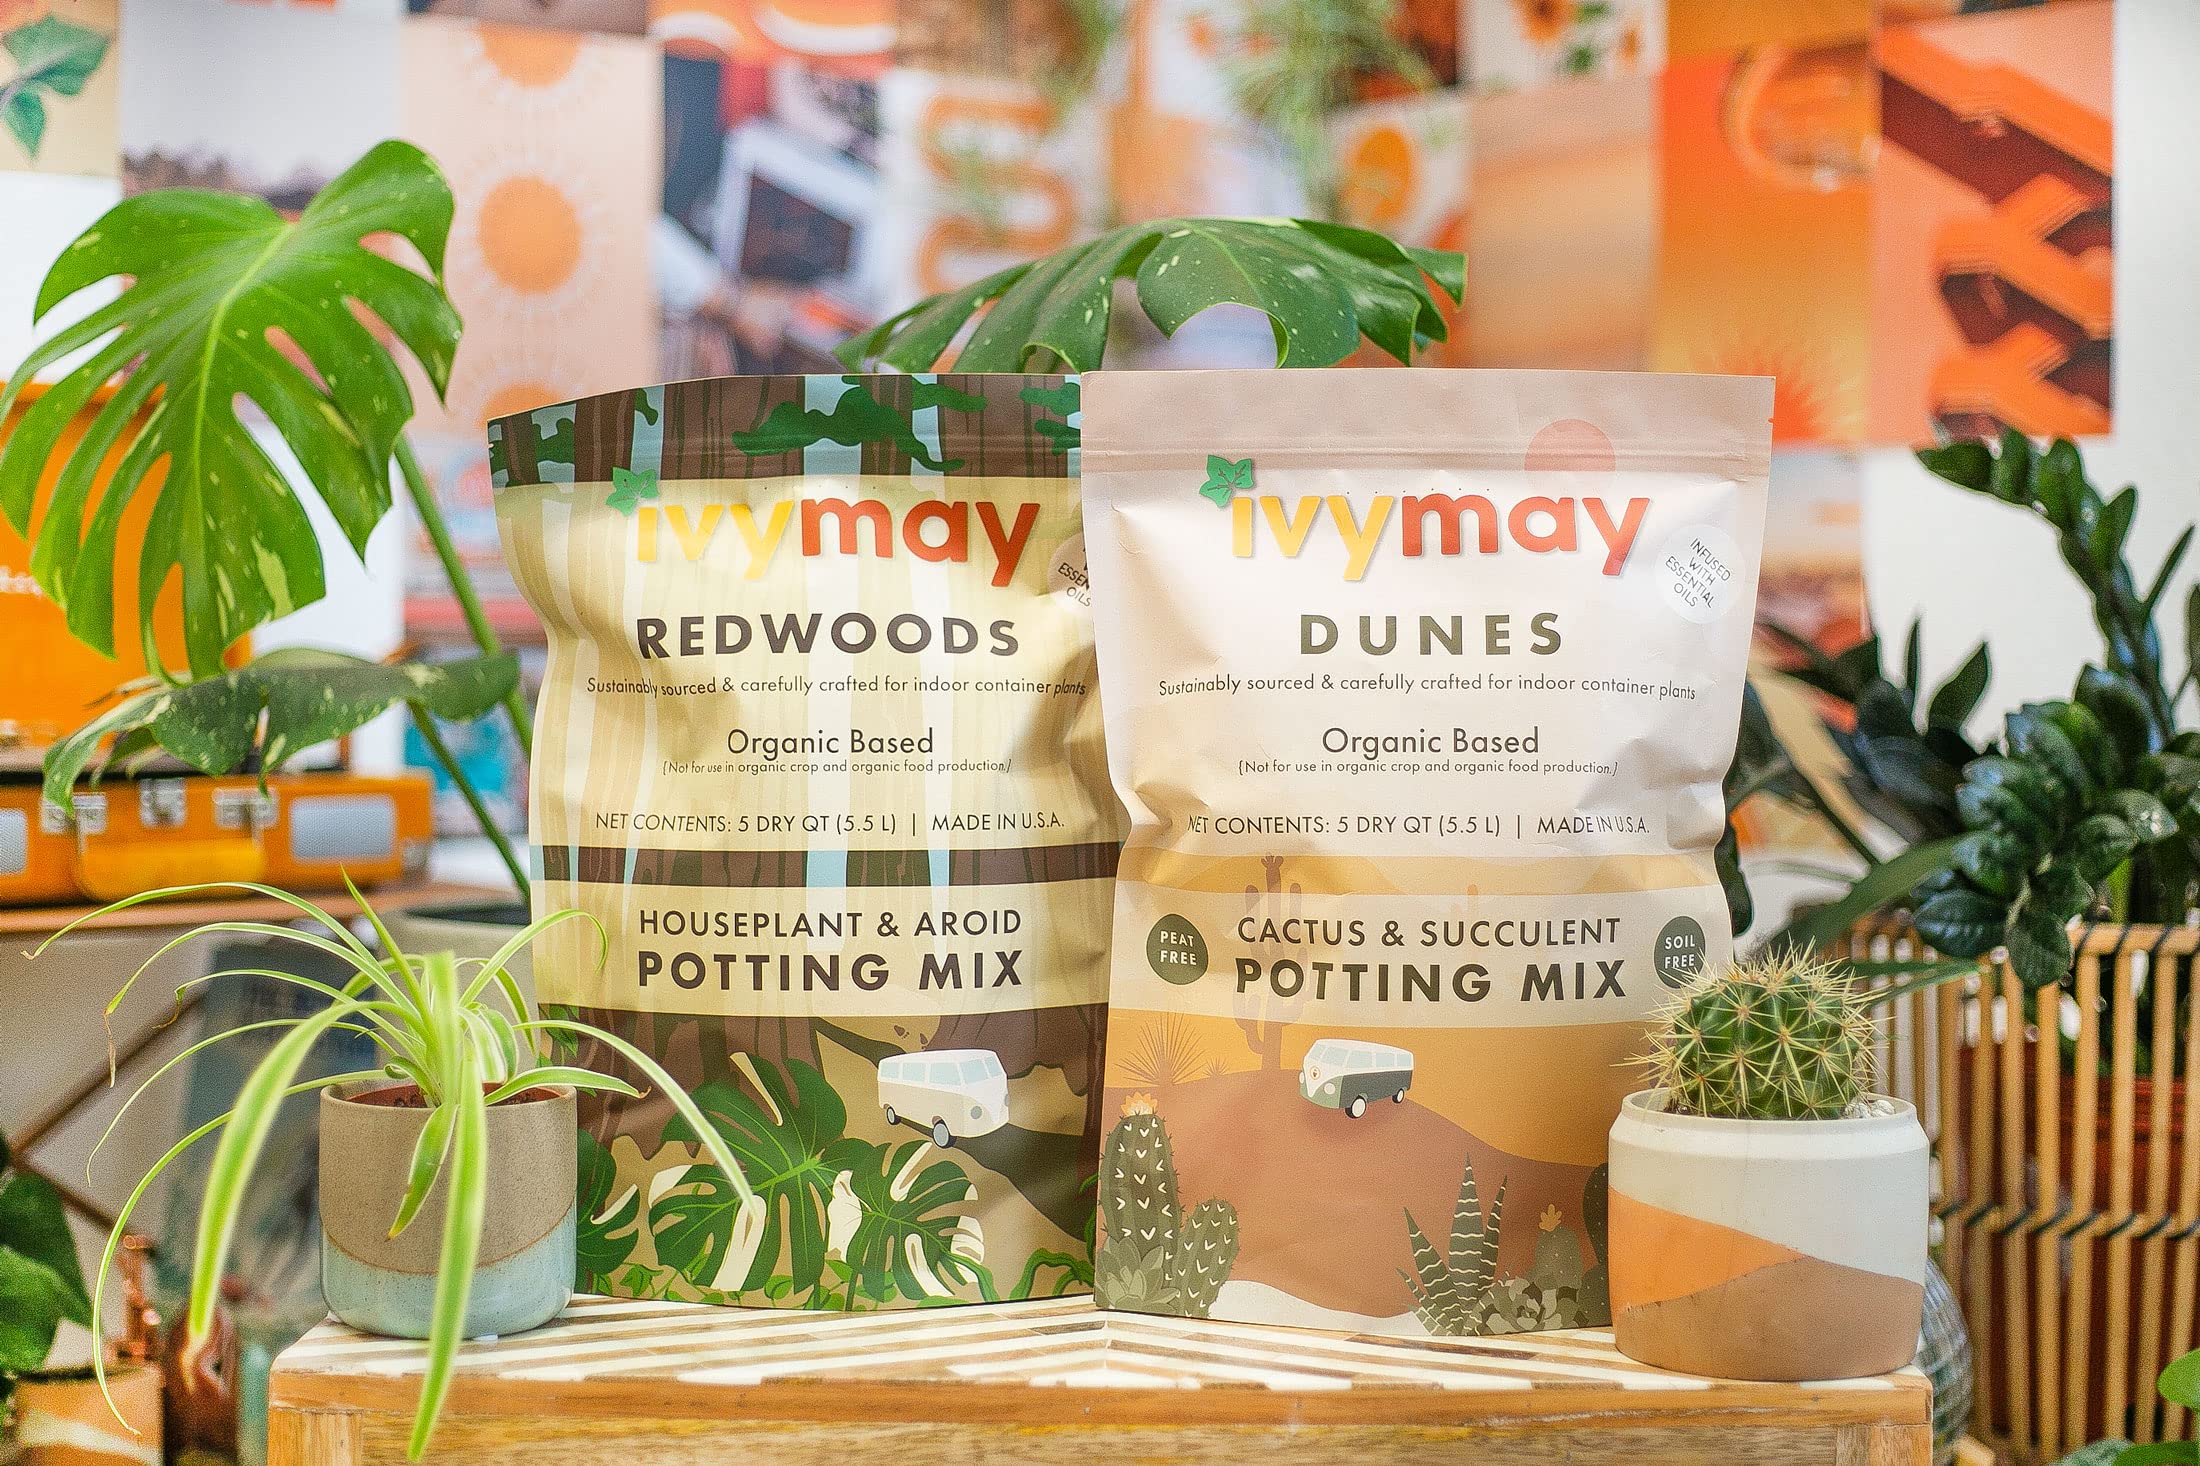 IvyMay Dunes Succulent Soil ― Organic Cactus Soil Potting Mix for Succulents, Ready to Use Potting Soil Indoor Plants with Perlite, Pumice, Earthworm Castings, Essential Oils ― 5 qt